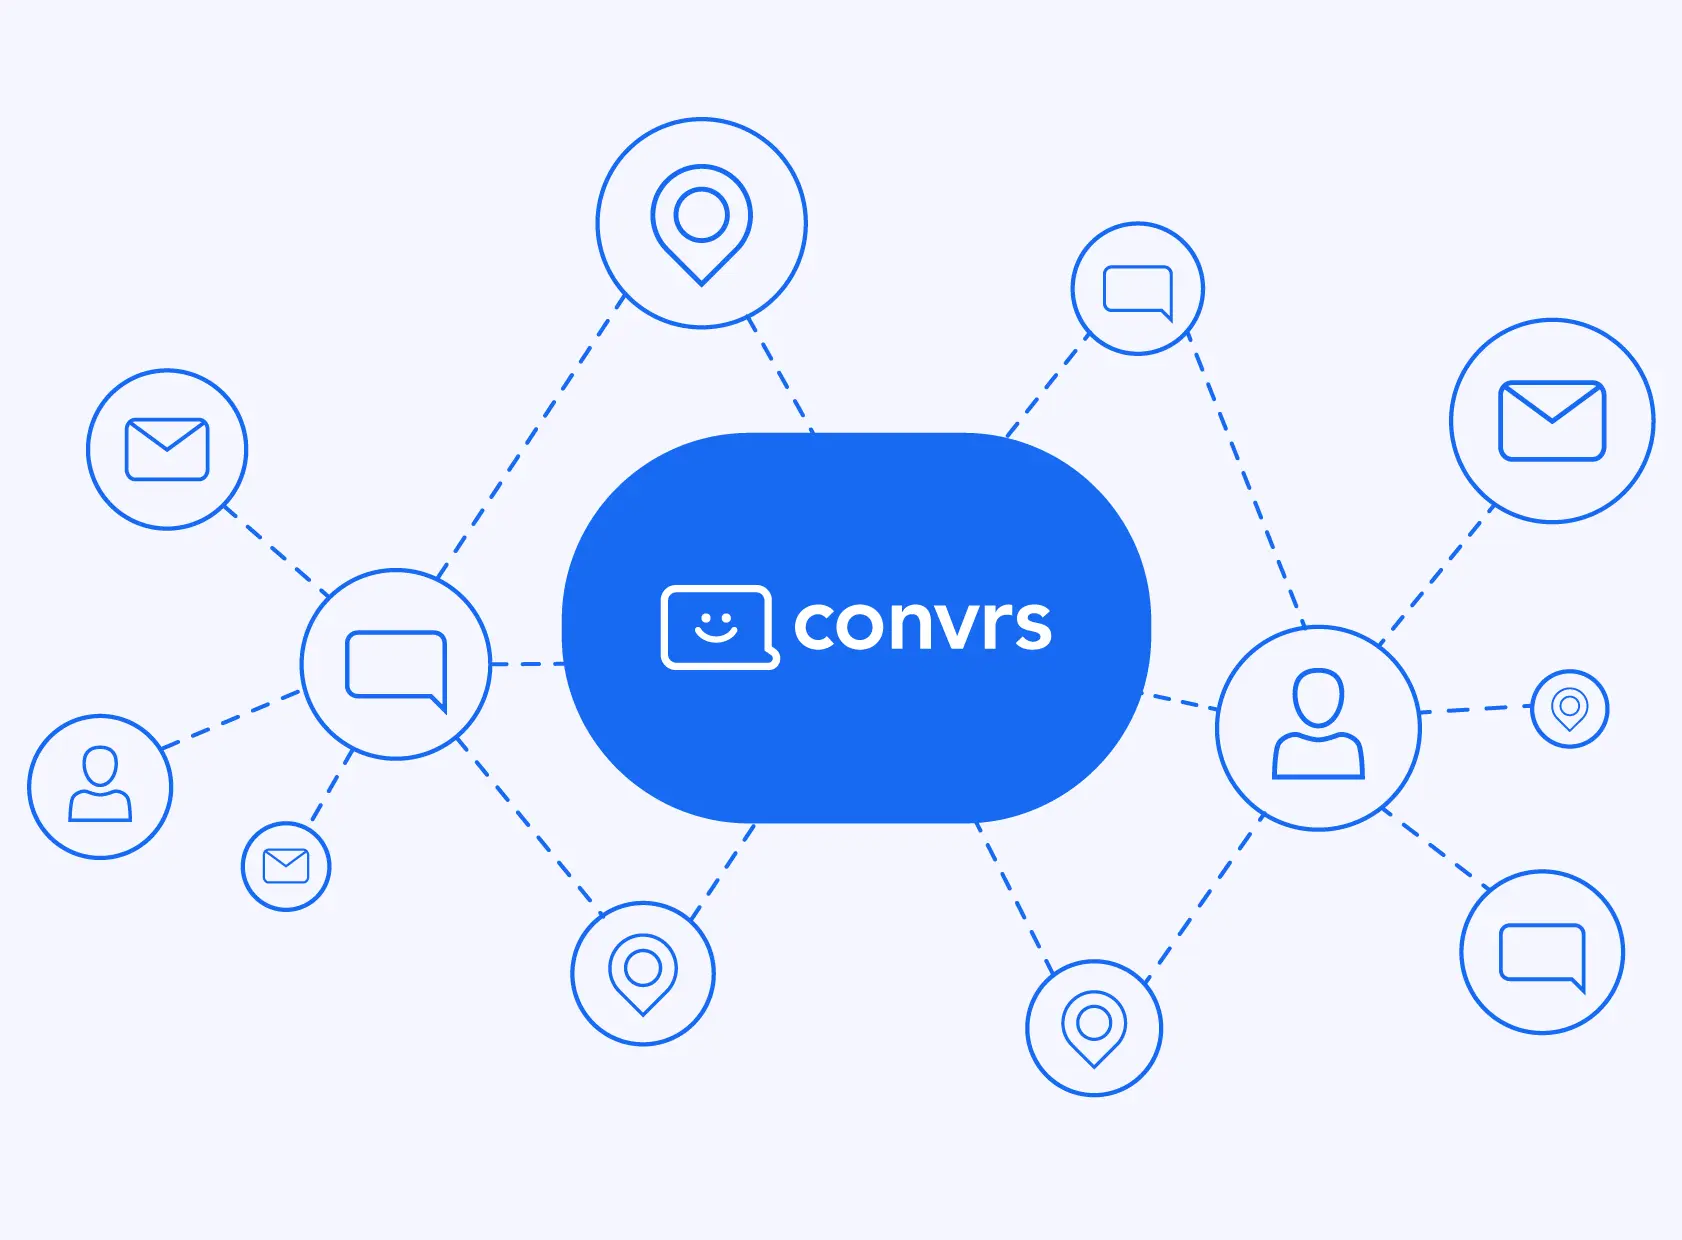 connect convrs to your
backoffice using our API